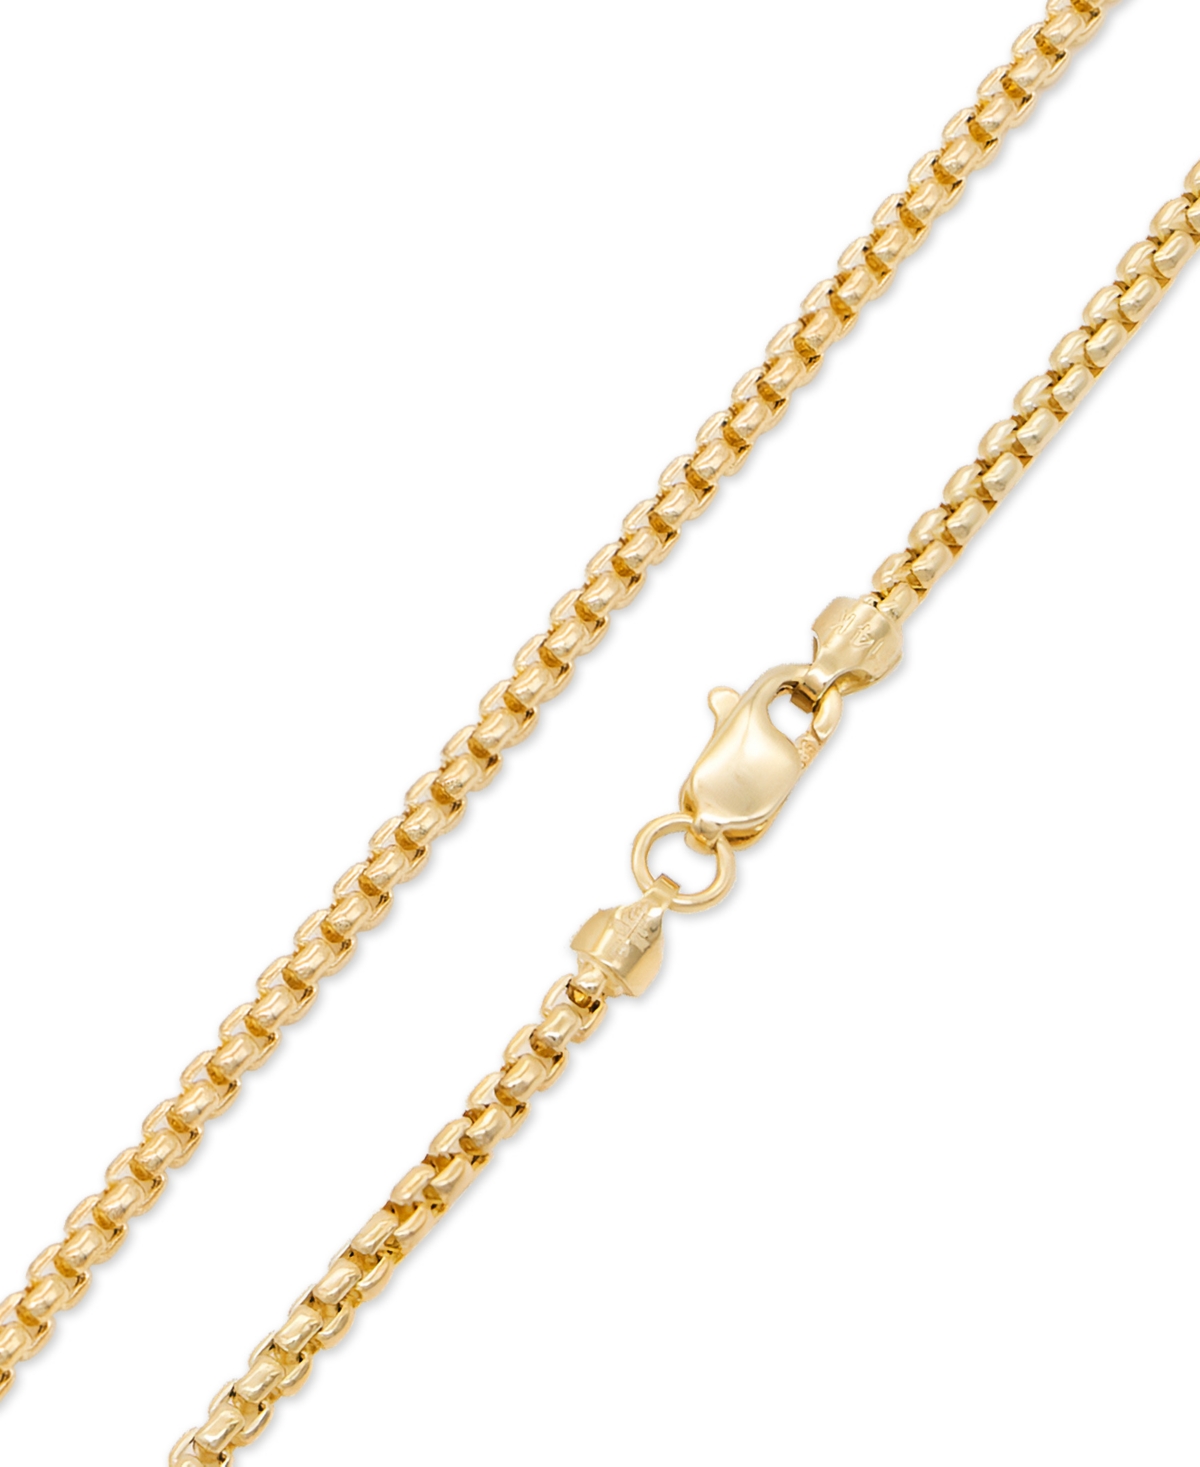 14K Gold Box Round 2mm Chain Bracelet, 7.0", approx. 1.8grams - Gold